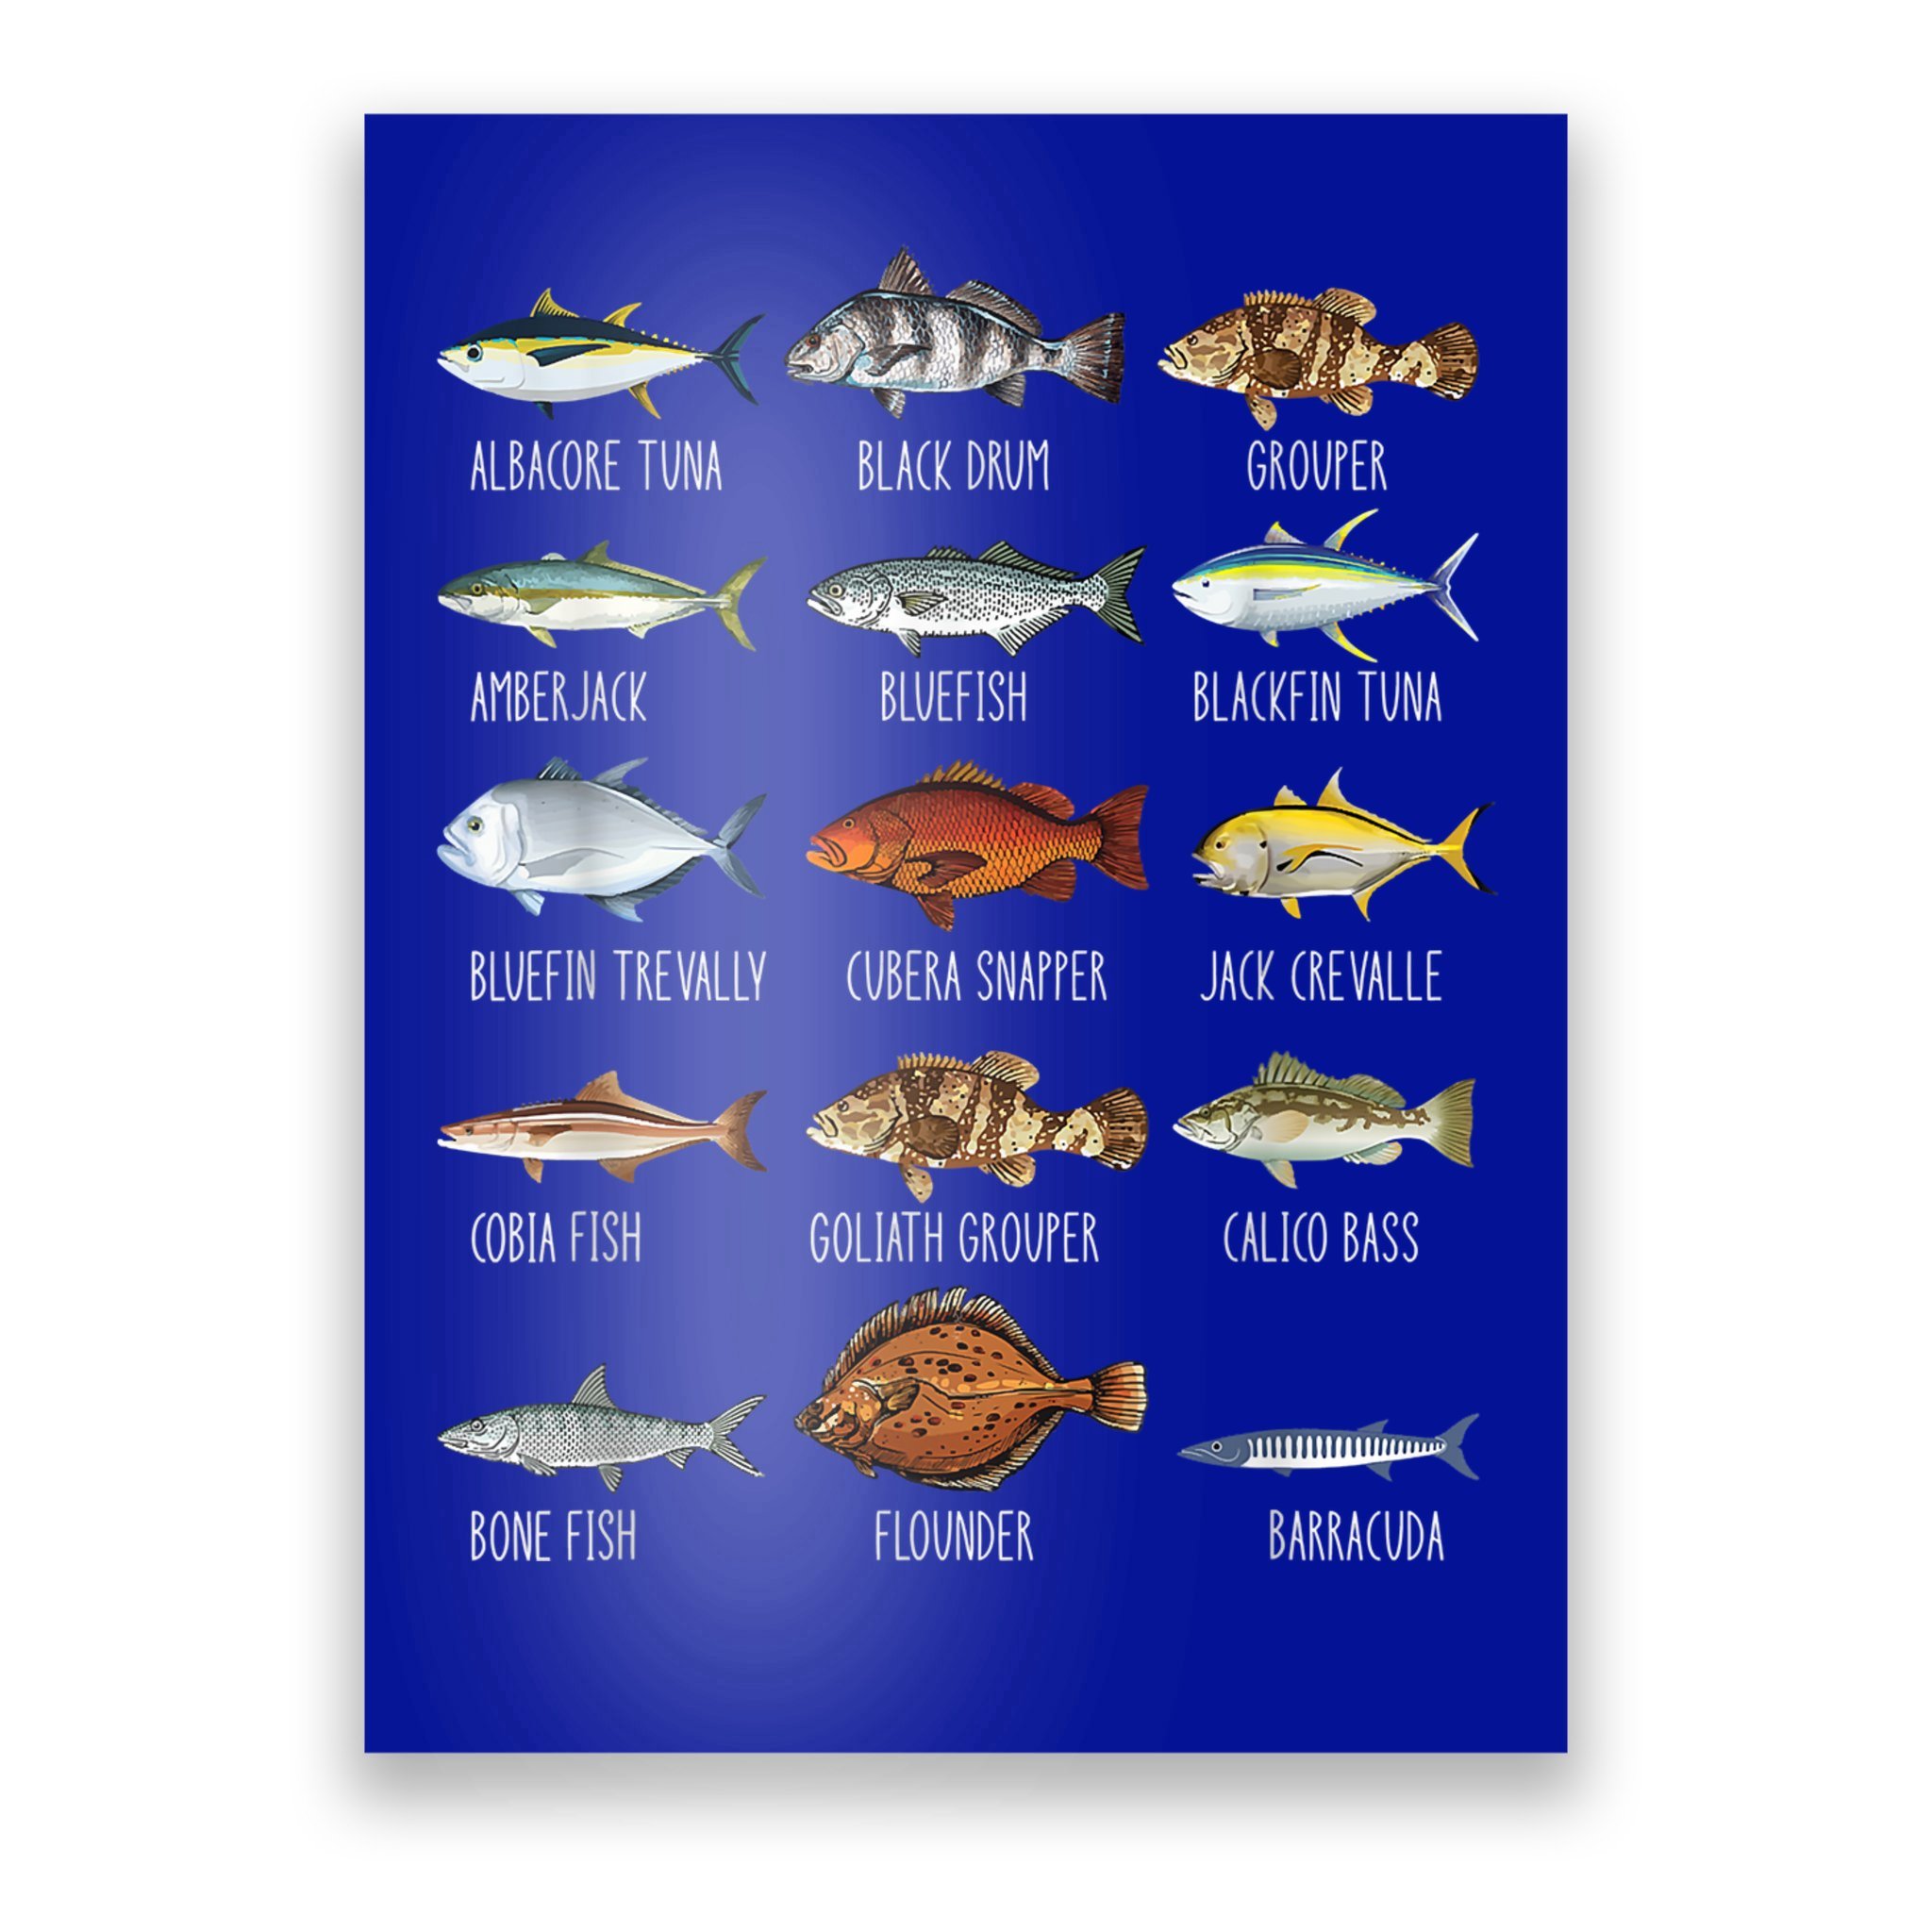 https://images3.teeshirtpalace.com/images/productImages/tos4097152-types-of-saltwater-fish-species-biology-fishing-lover--blue-post-garment.jpg